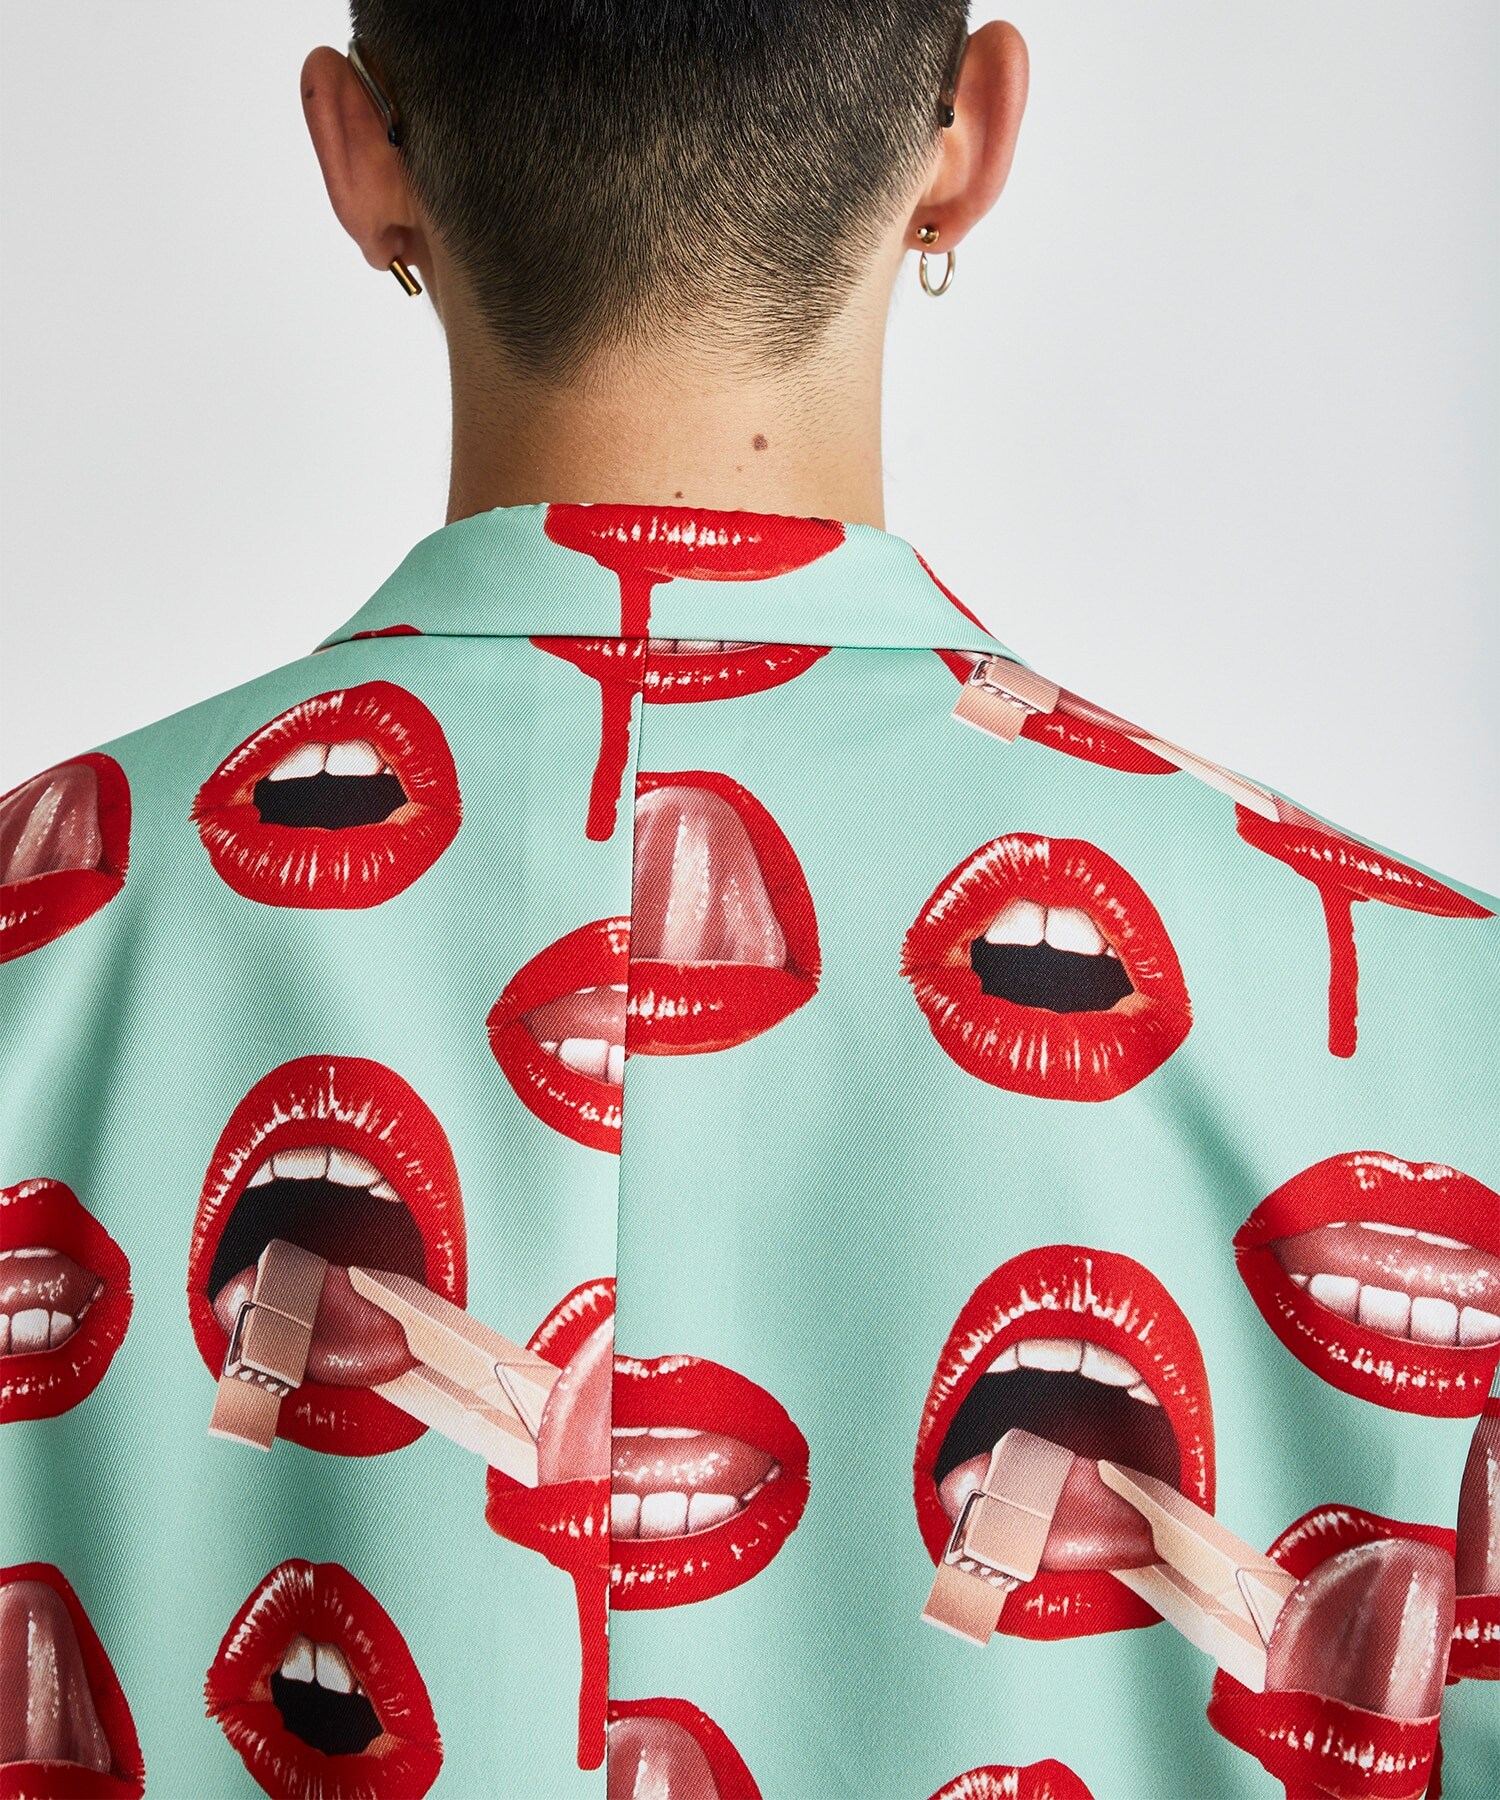 Tailored Jacket - FOUR MOUTHArtwork by TREVOR BROWN KIDILL